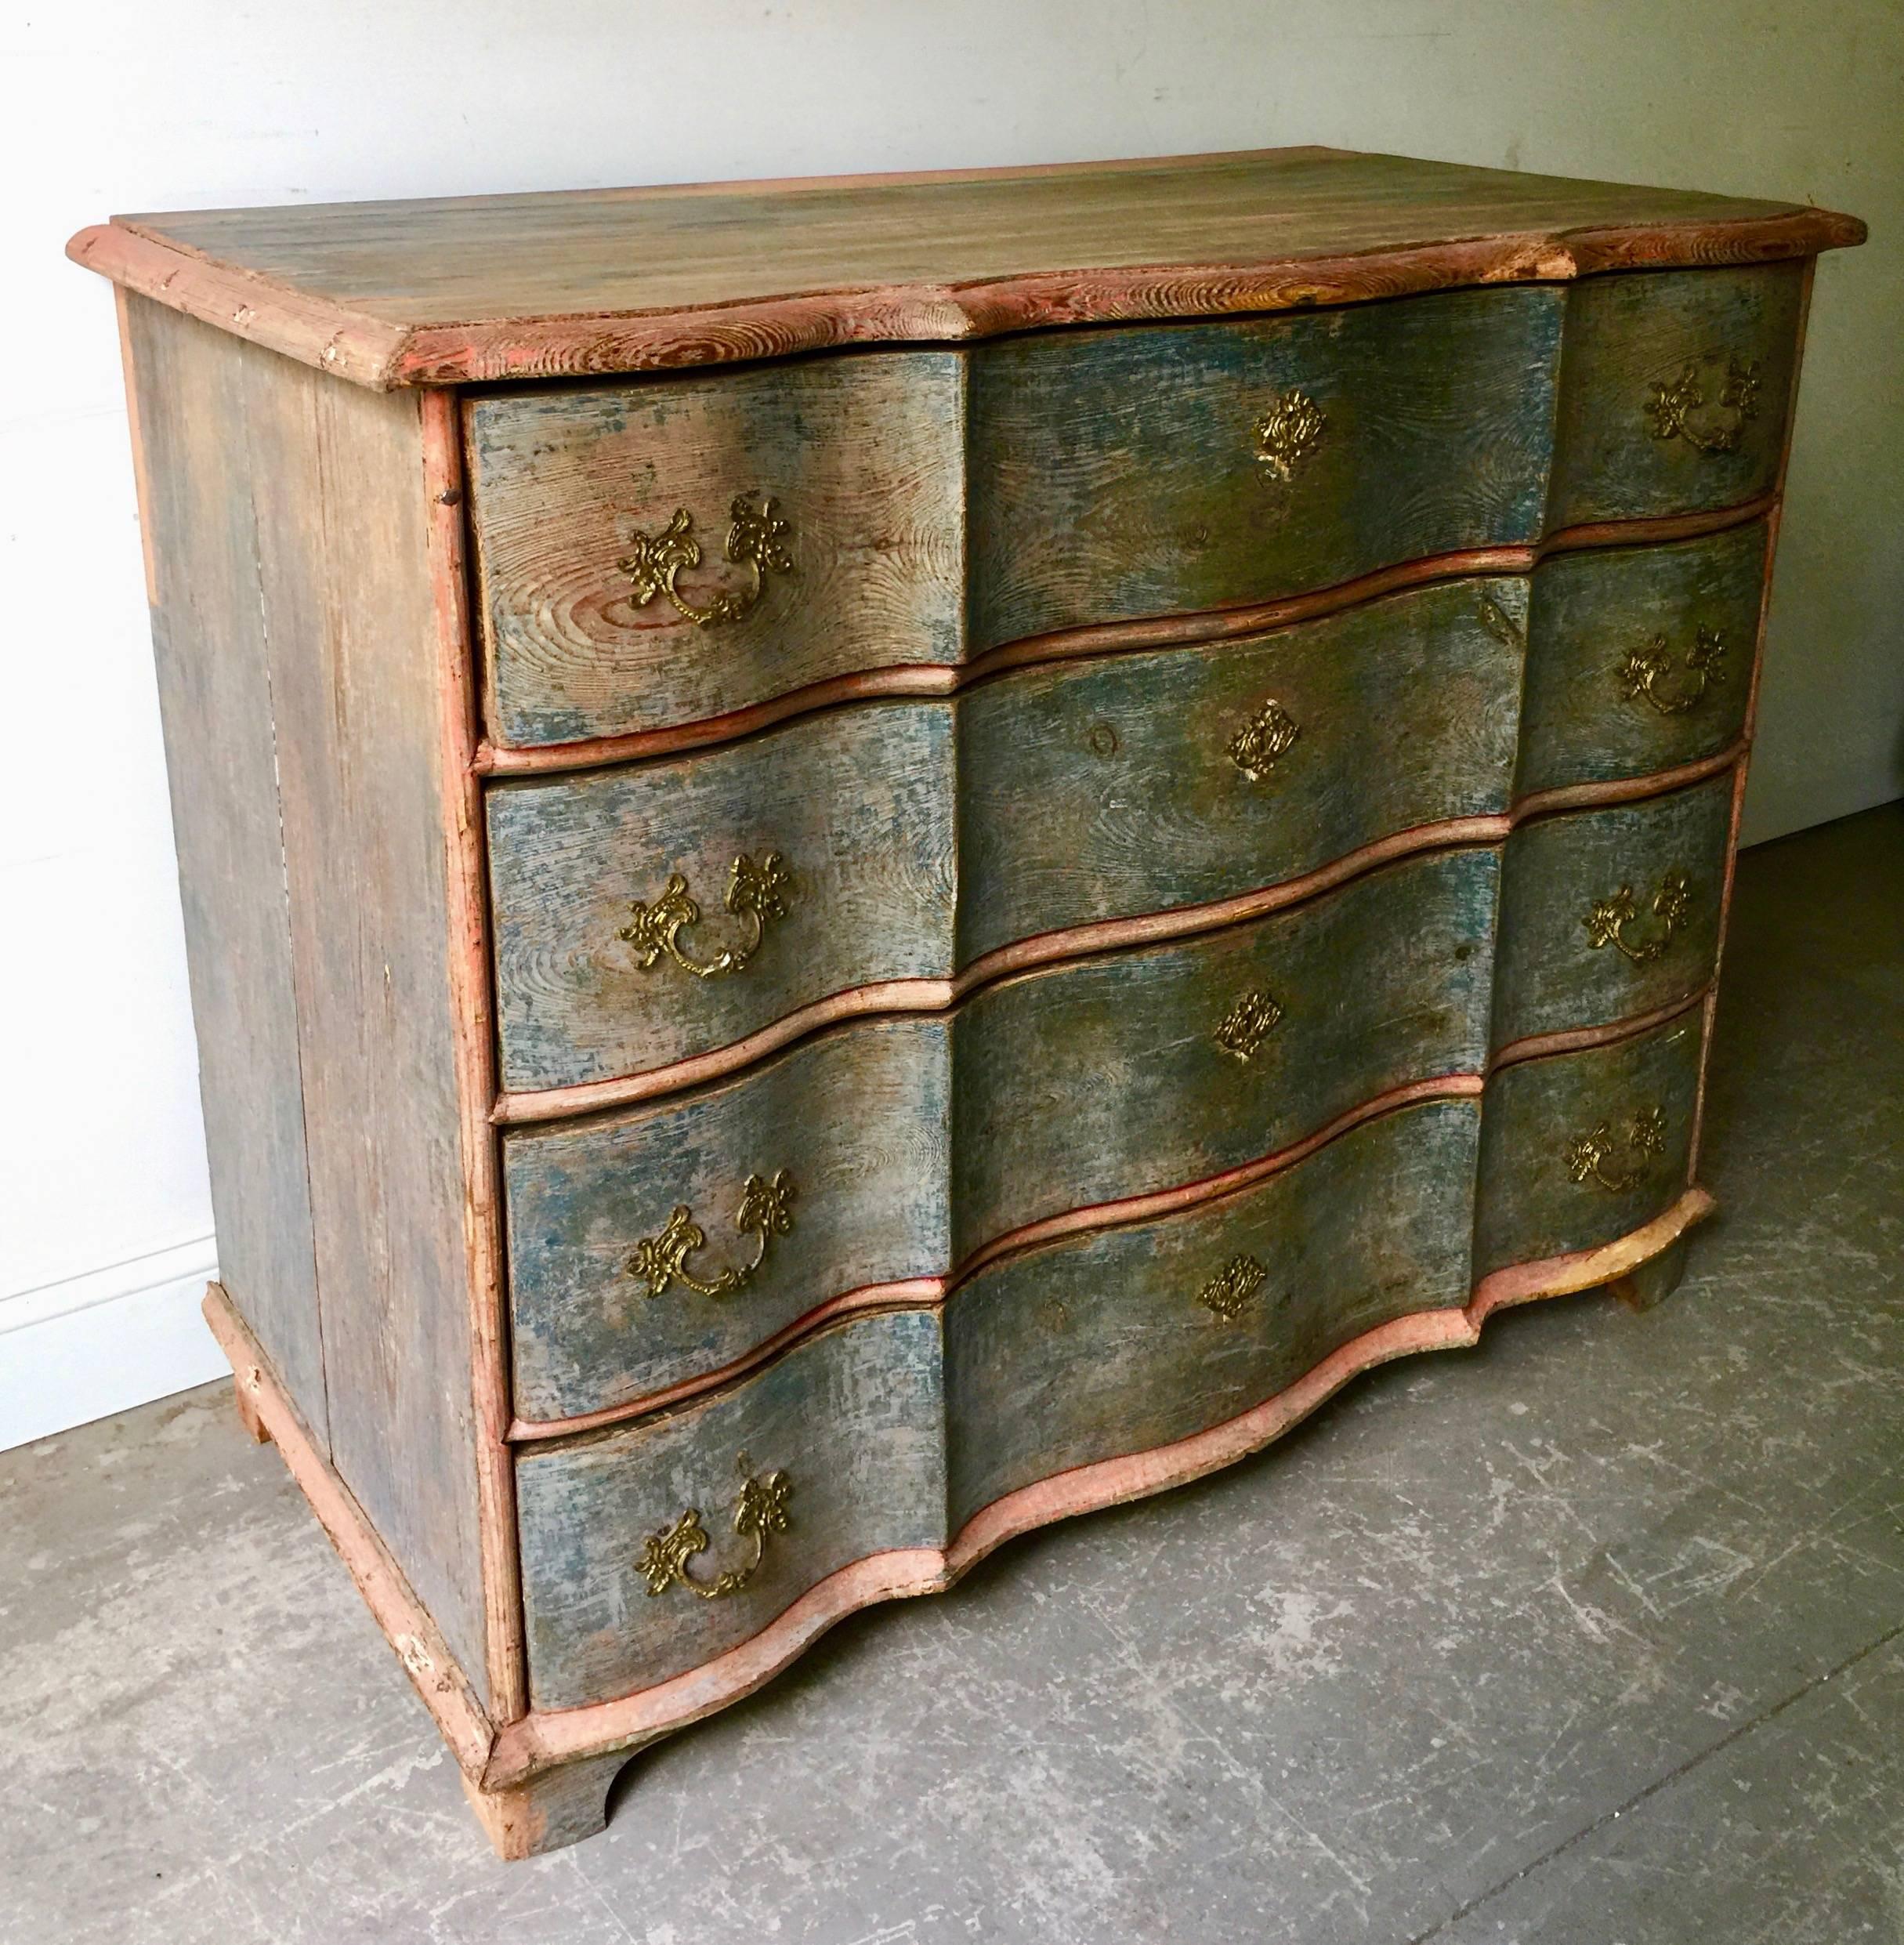 An exceptional 19th century Danish Rococo chest in brilliant time worn original paint with beautifully carved serpentine drawers with original handsome bronze escutcheons,
Denmark, circa 1880.
Surprising pieces and objects, authentic, decorative